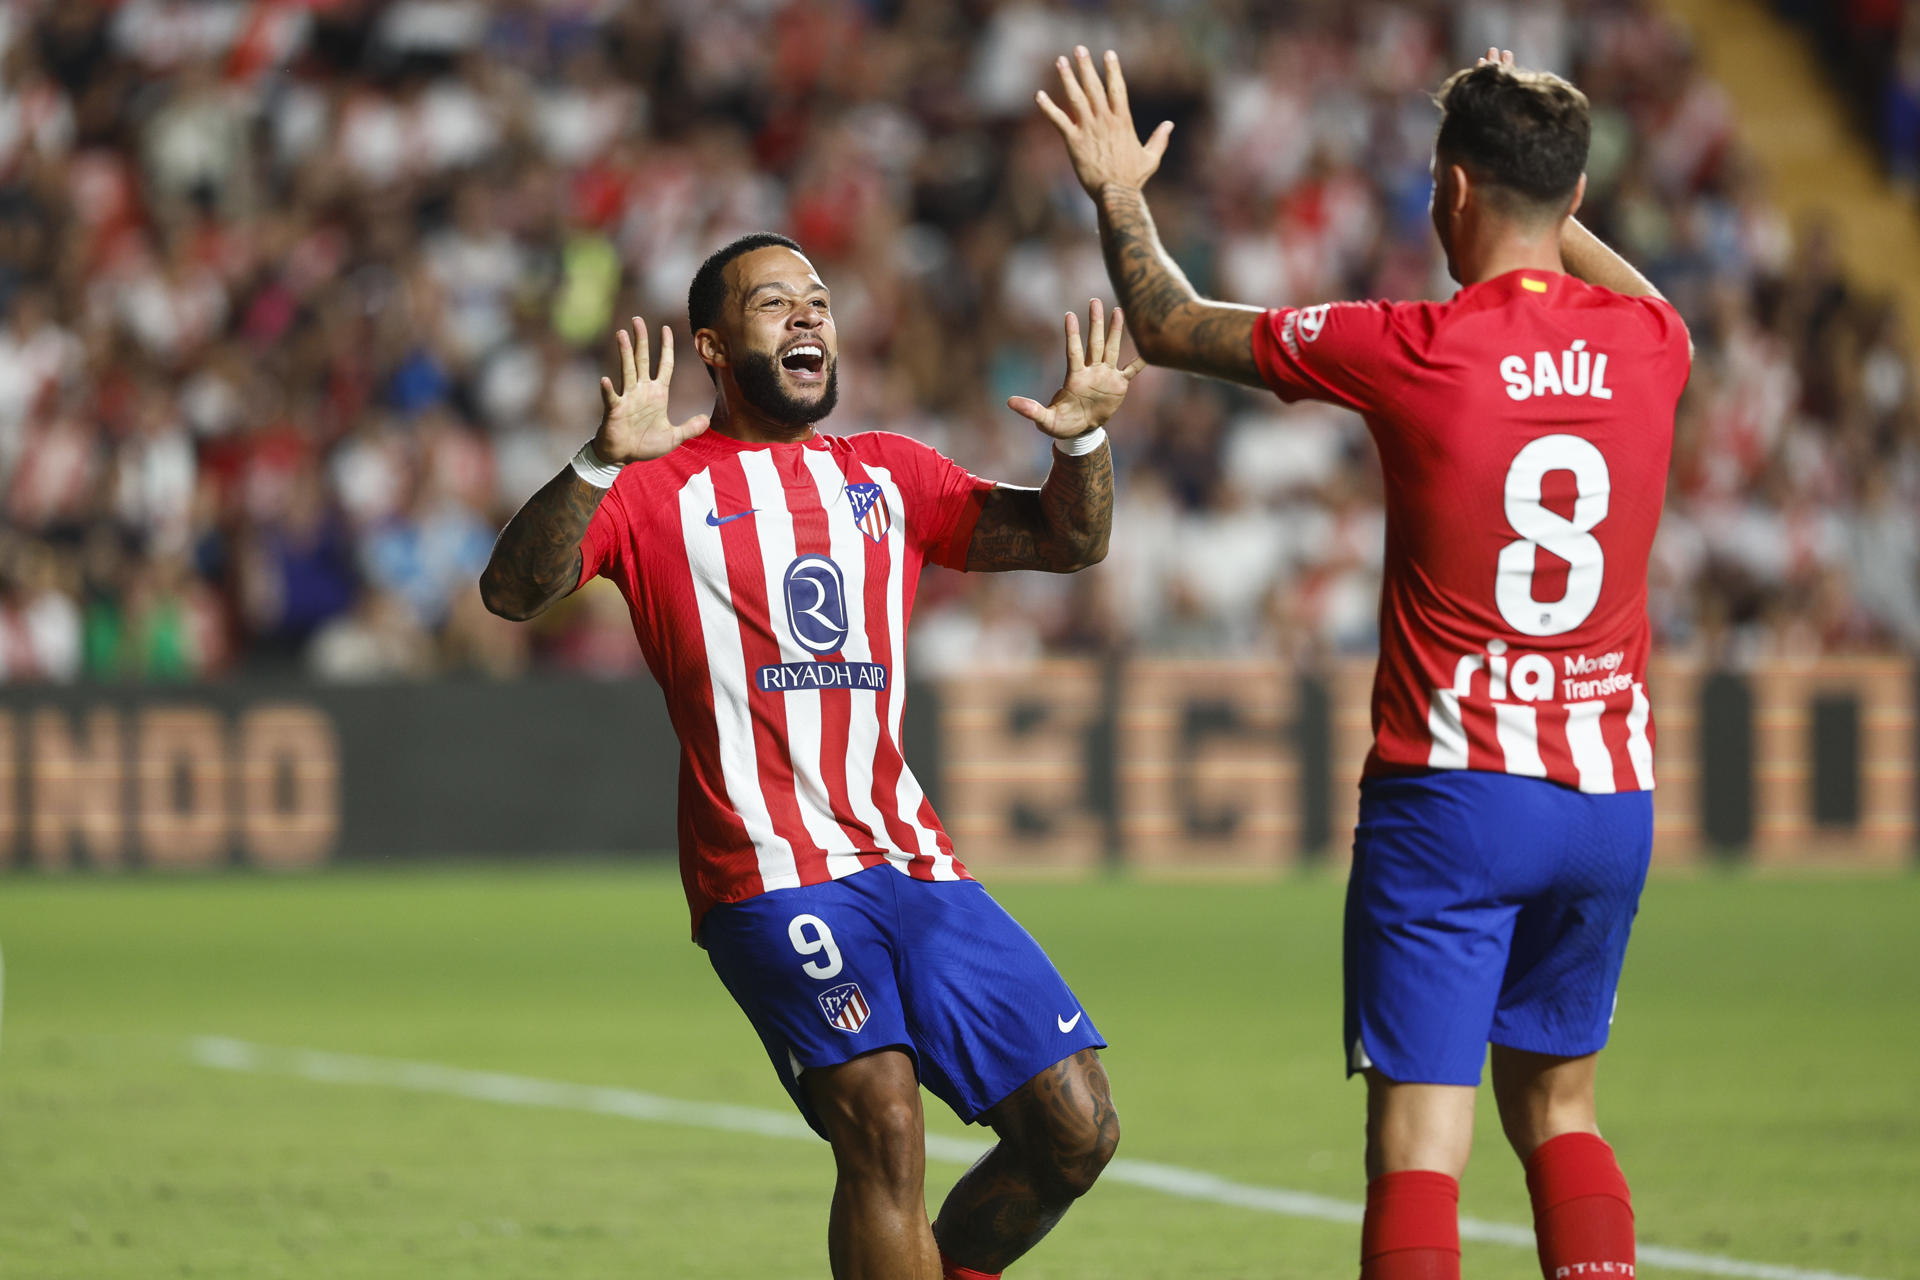 Atletico Madrid preparing summer clear-out, four “certainties” identified as sale candidates